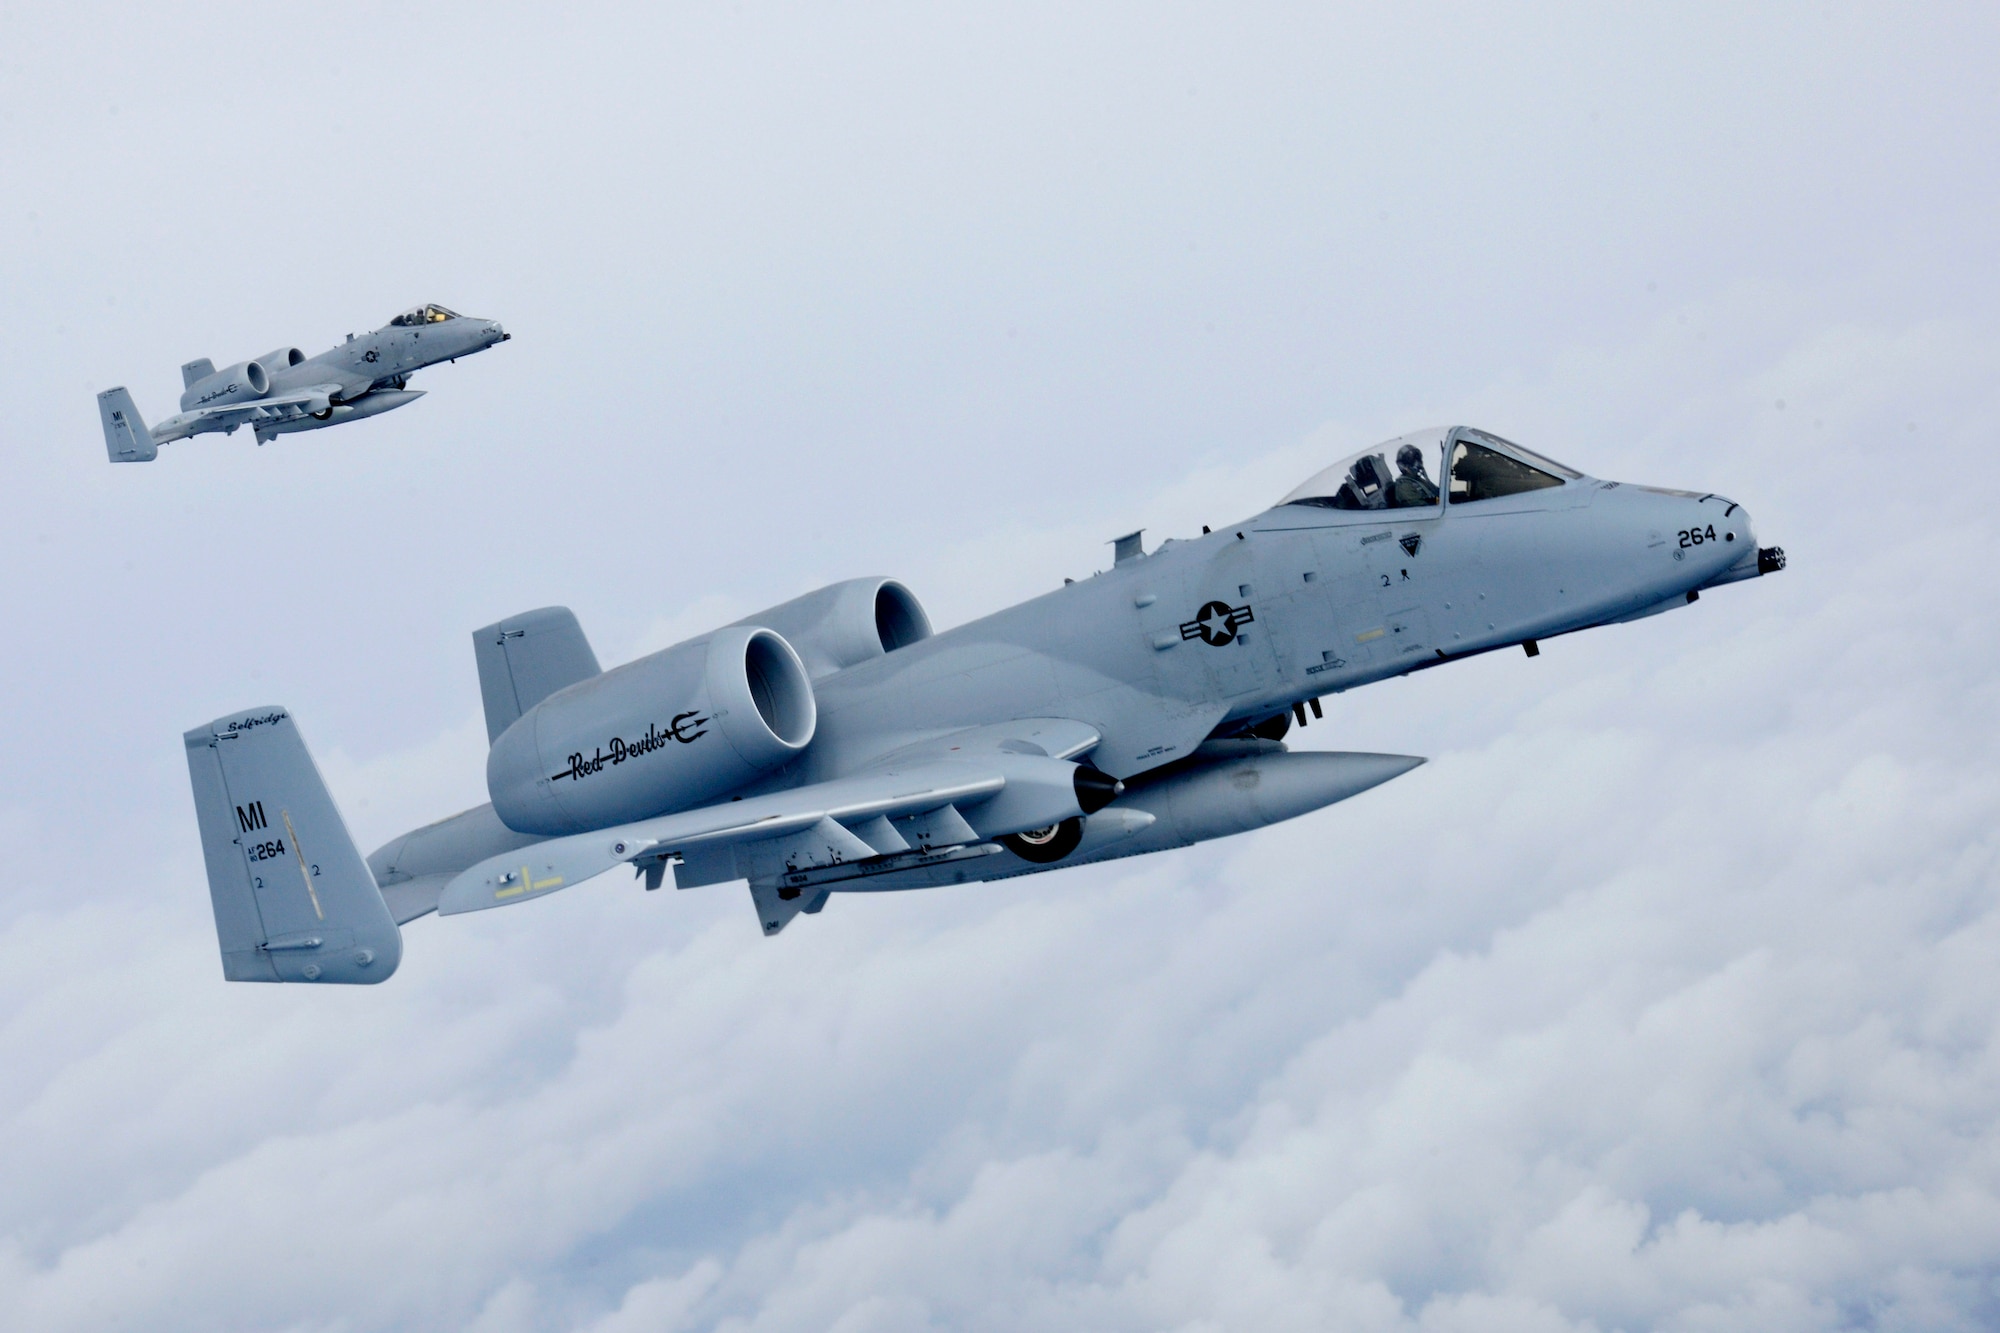 150411-Z-EZ686-183 -- A-10 Thunderbolt II aircraft from Selfridge Air National Guard Base seen in flight while deploying to Southwest Asia earlier in April. The aircraft are flown by the 107th Fighter Squadron at Selfridge. (U.S. Air National Guard photo by Master Sgt. David Kujawa)

